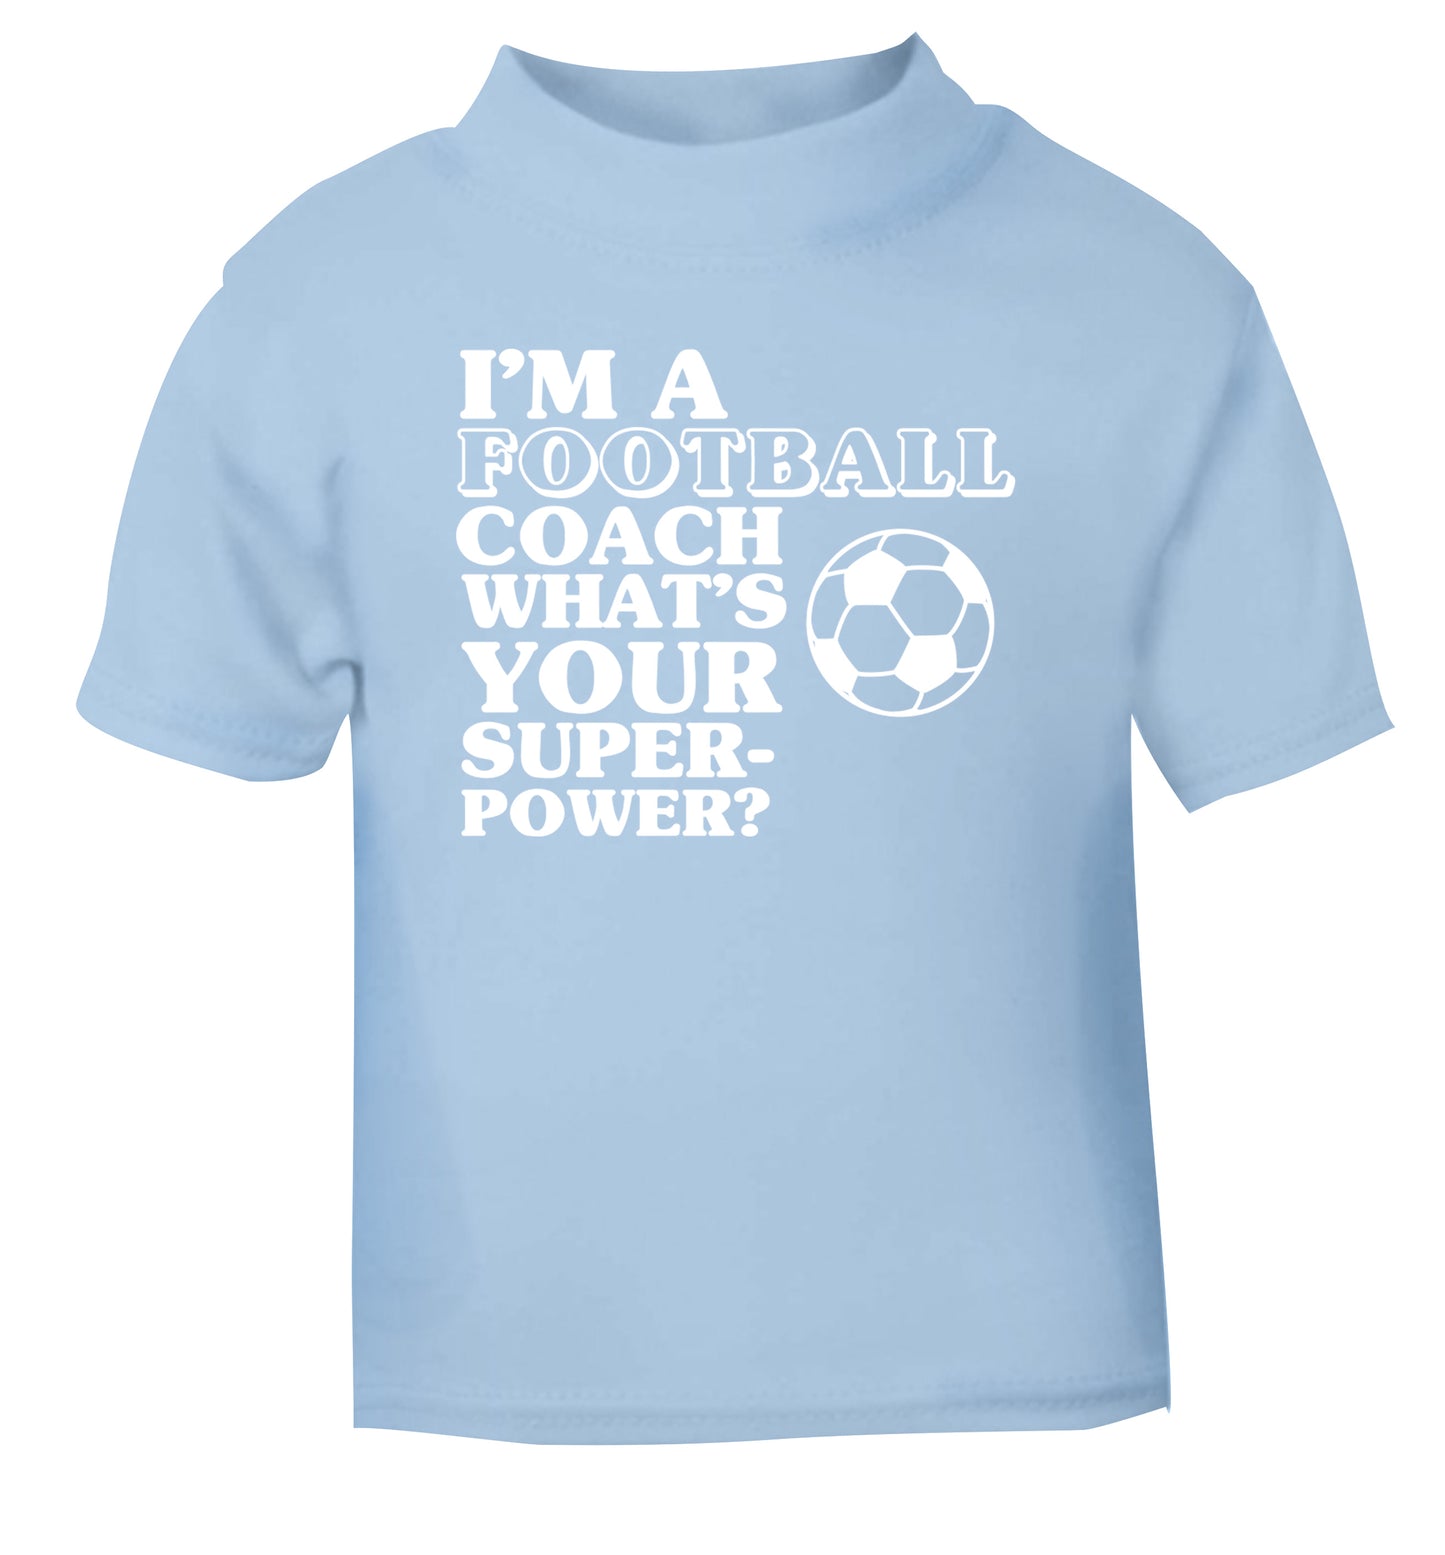 I'm a football coach what's your superpower? light blue Baby Toddler Tshirt 2 Years